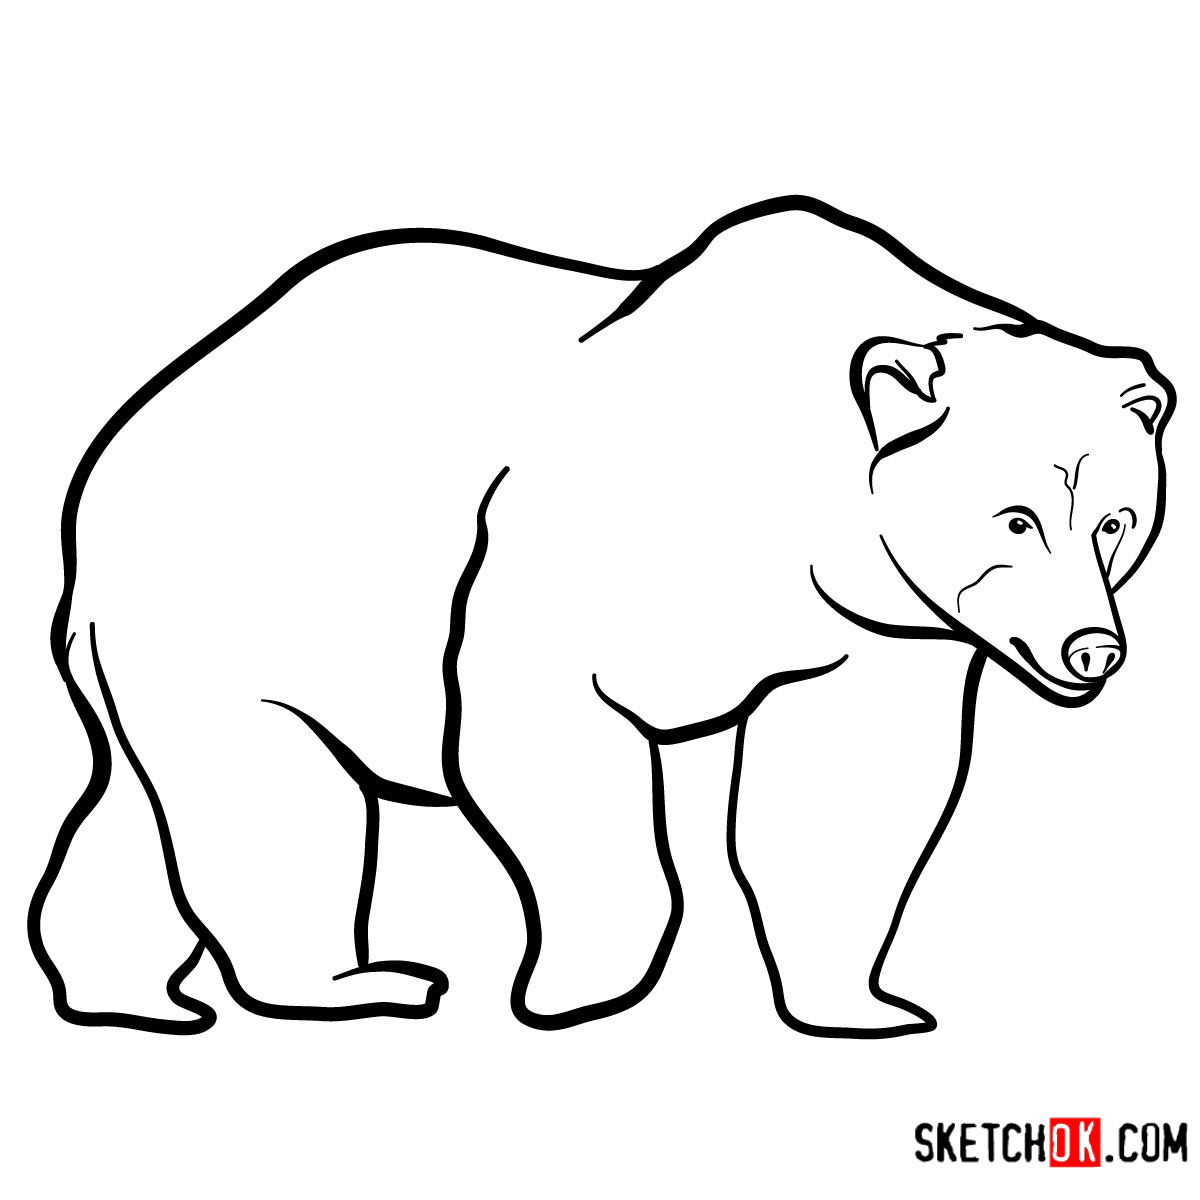 How to draw a Brown bear | Wild Animals - Sketchok easy drawing guides